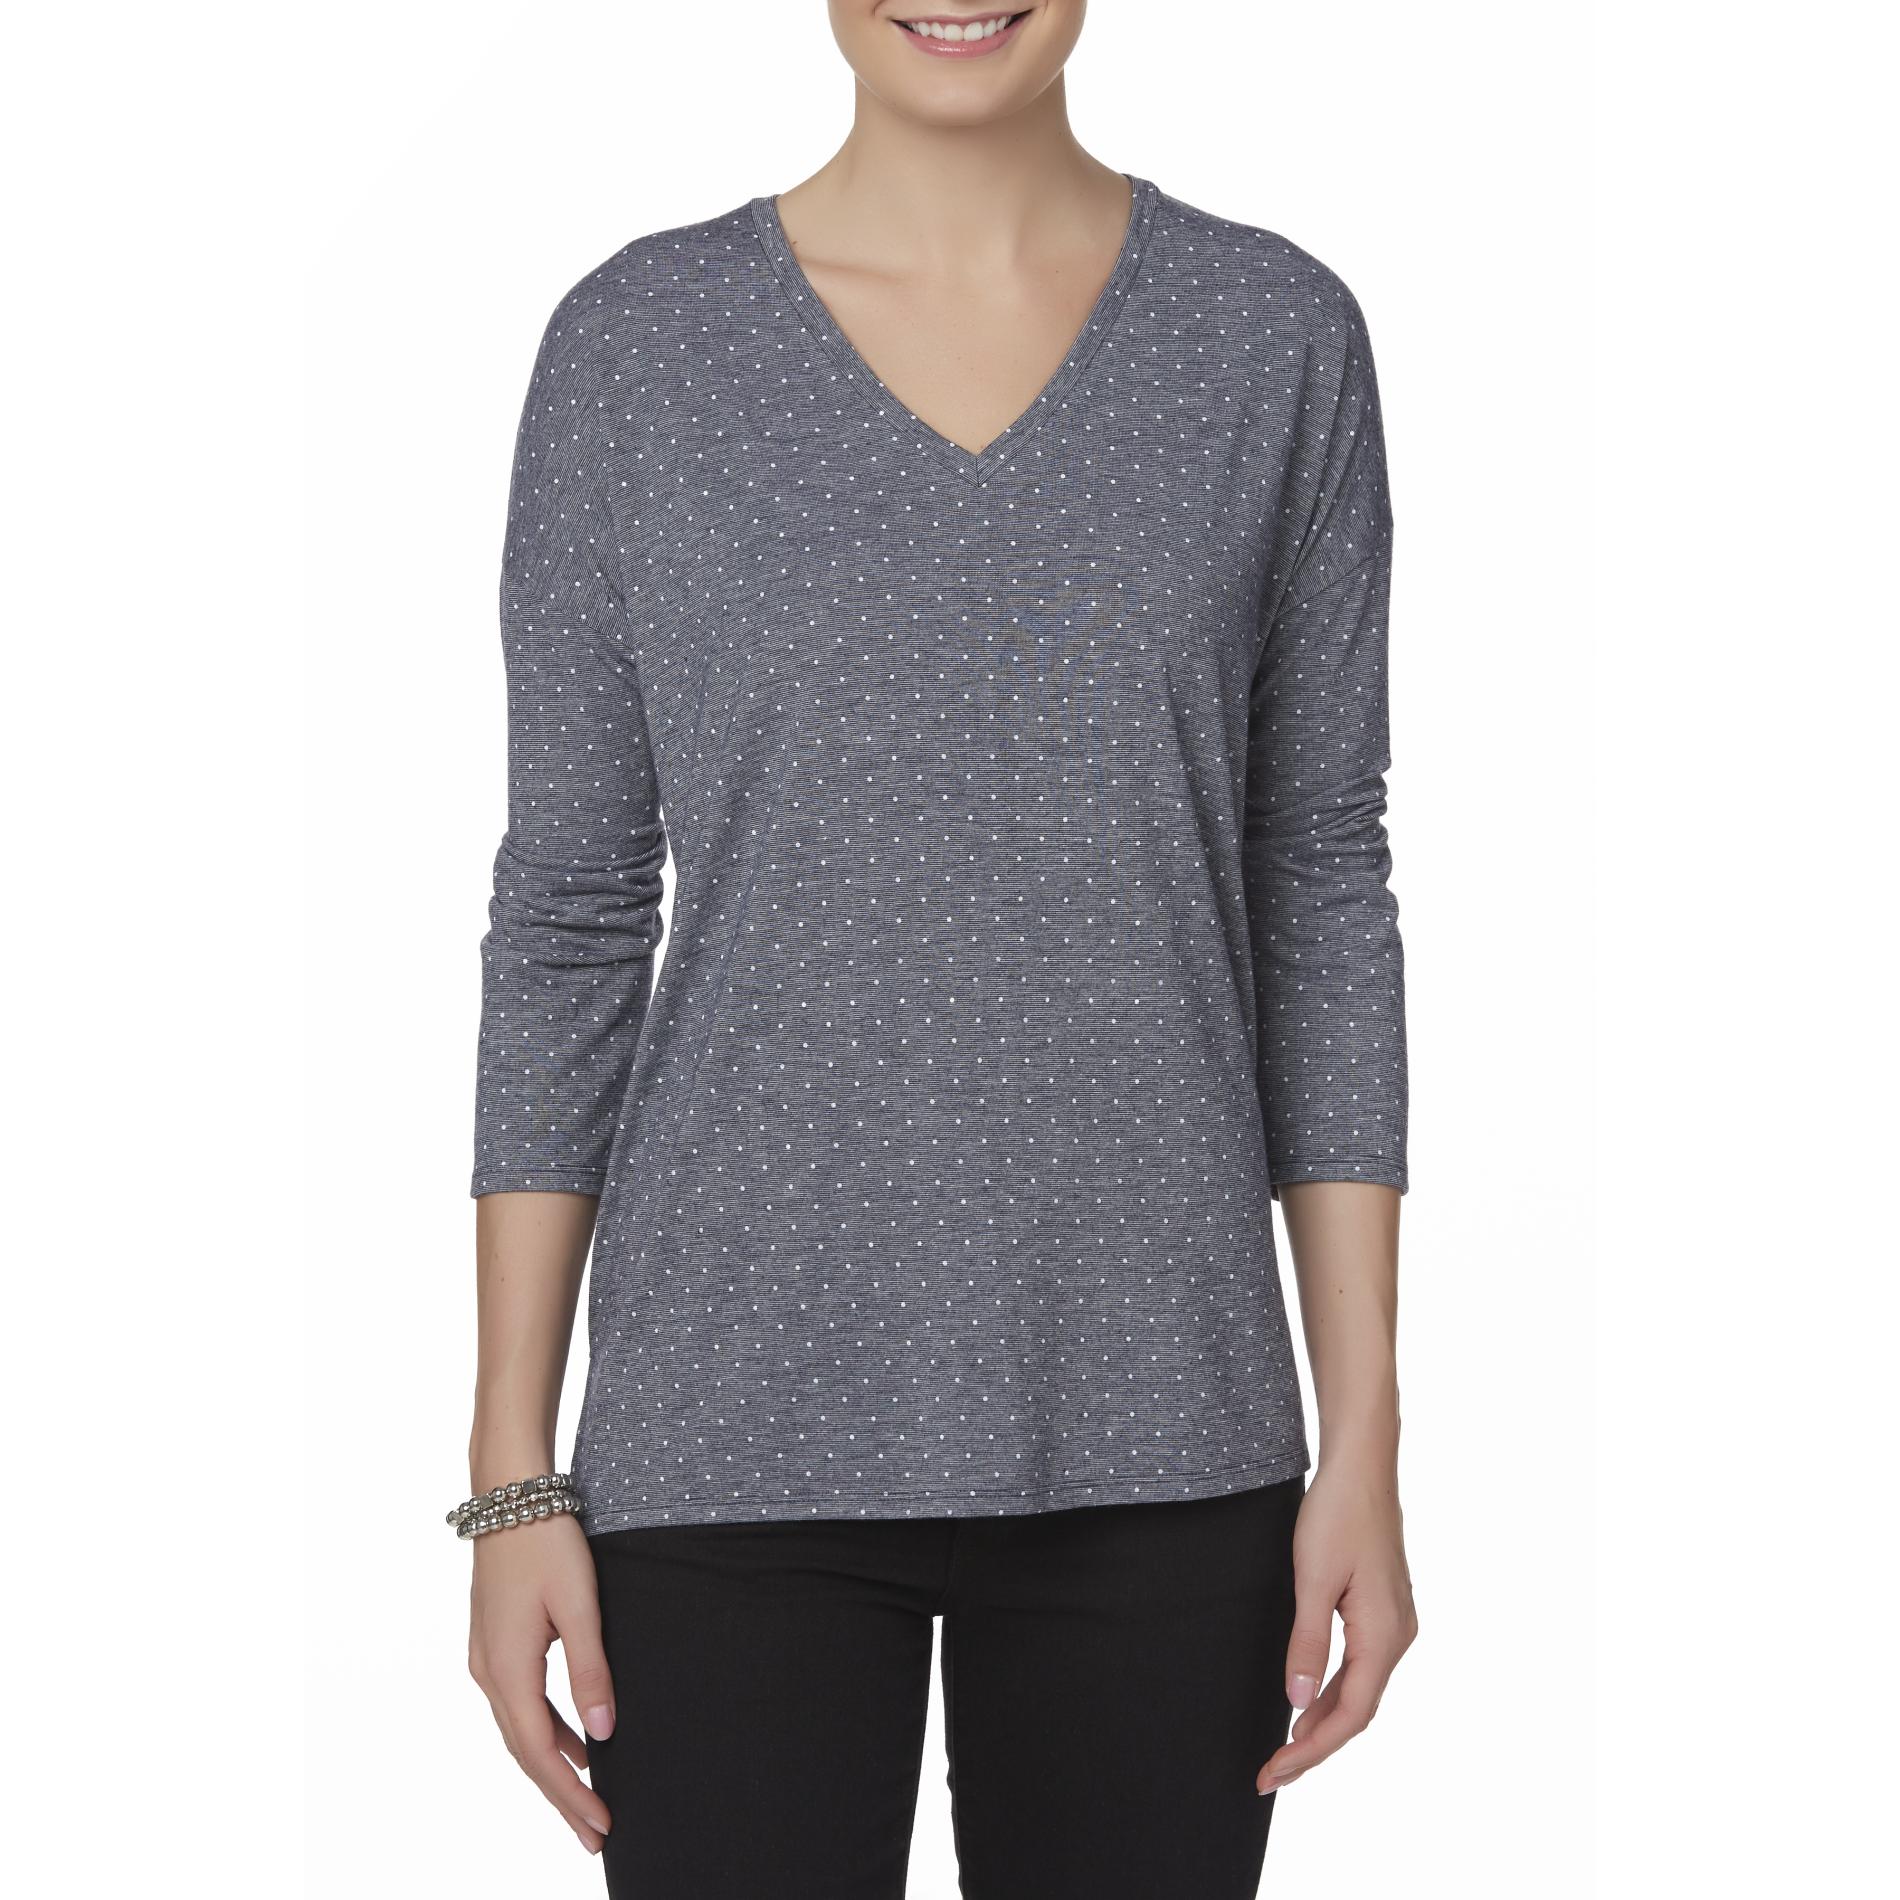 Simply Styled Women's V-Neck Top